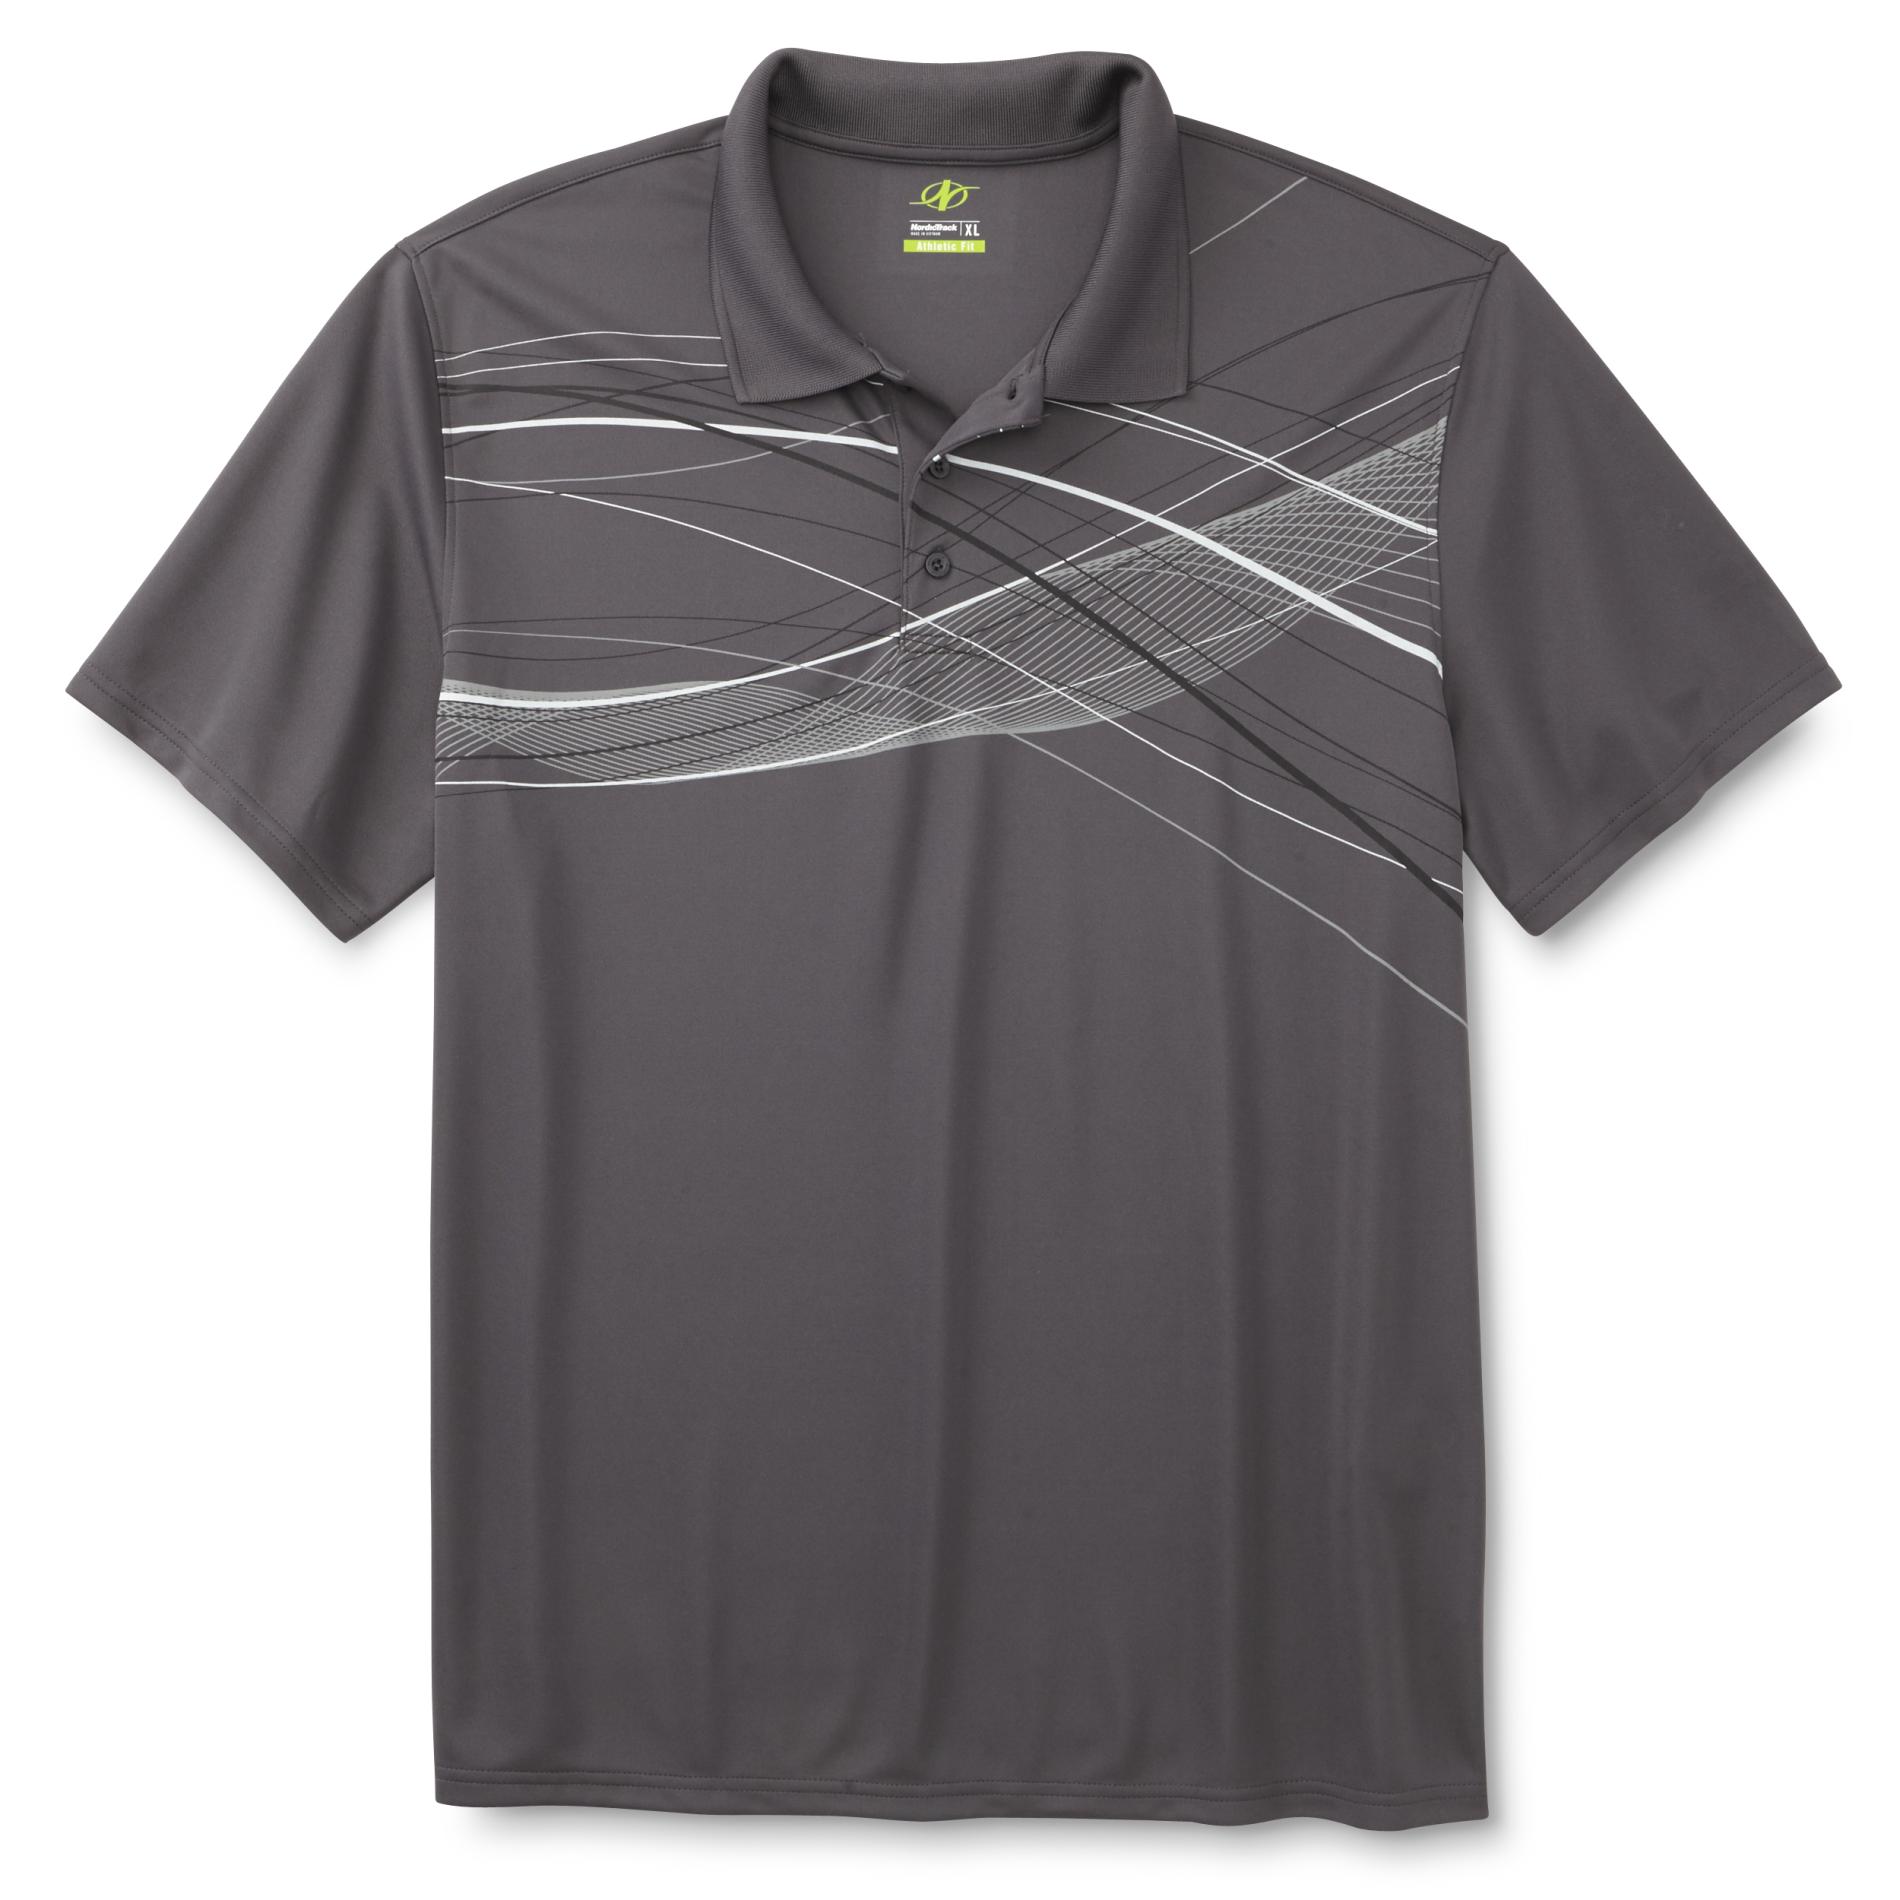 NordicTrack Men's Performance Polo Shirt - Abstract Print